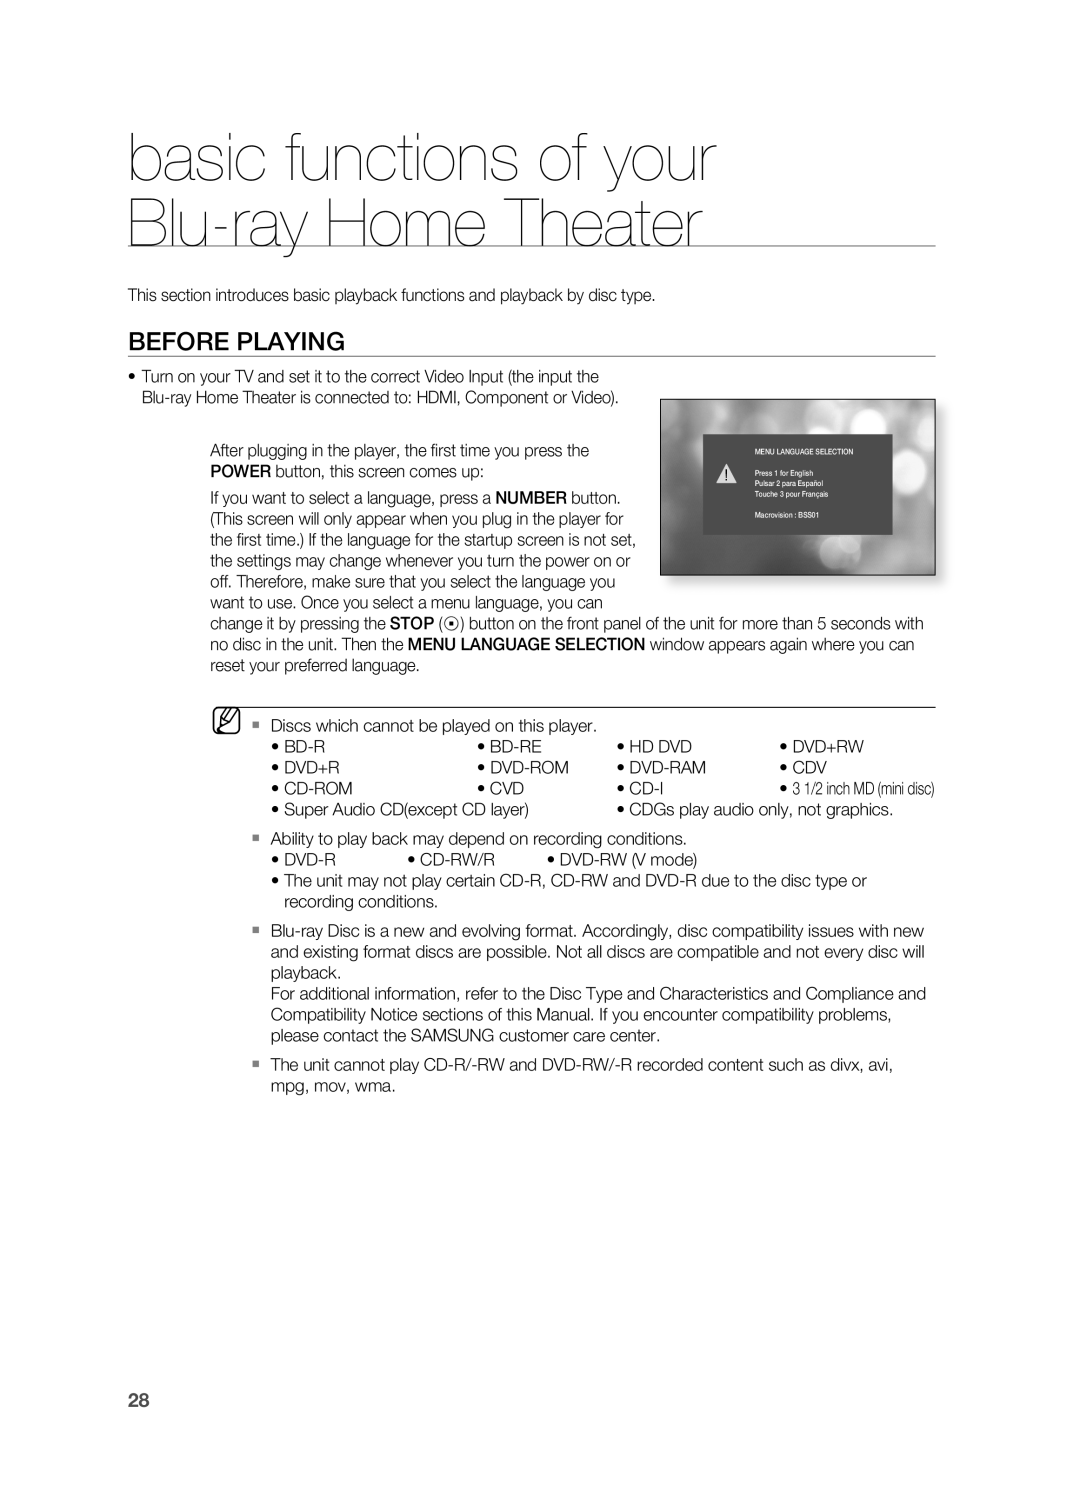 Samsung HT-BD2 manual basic functions of your Blu-rayHome Theater, Before Playing 